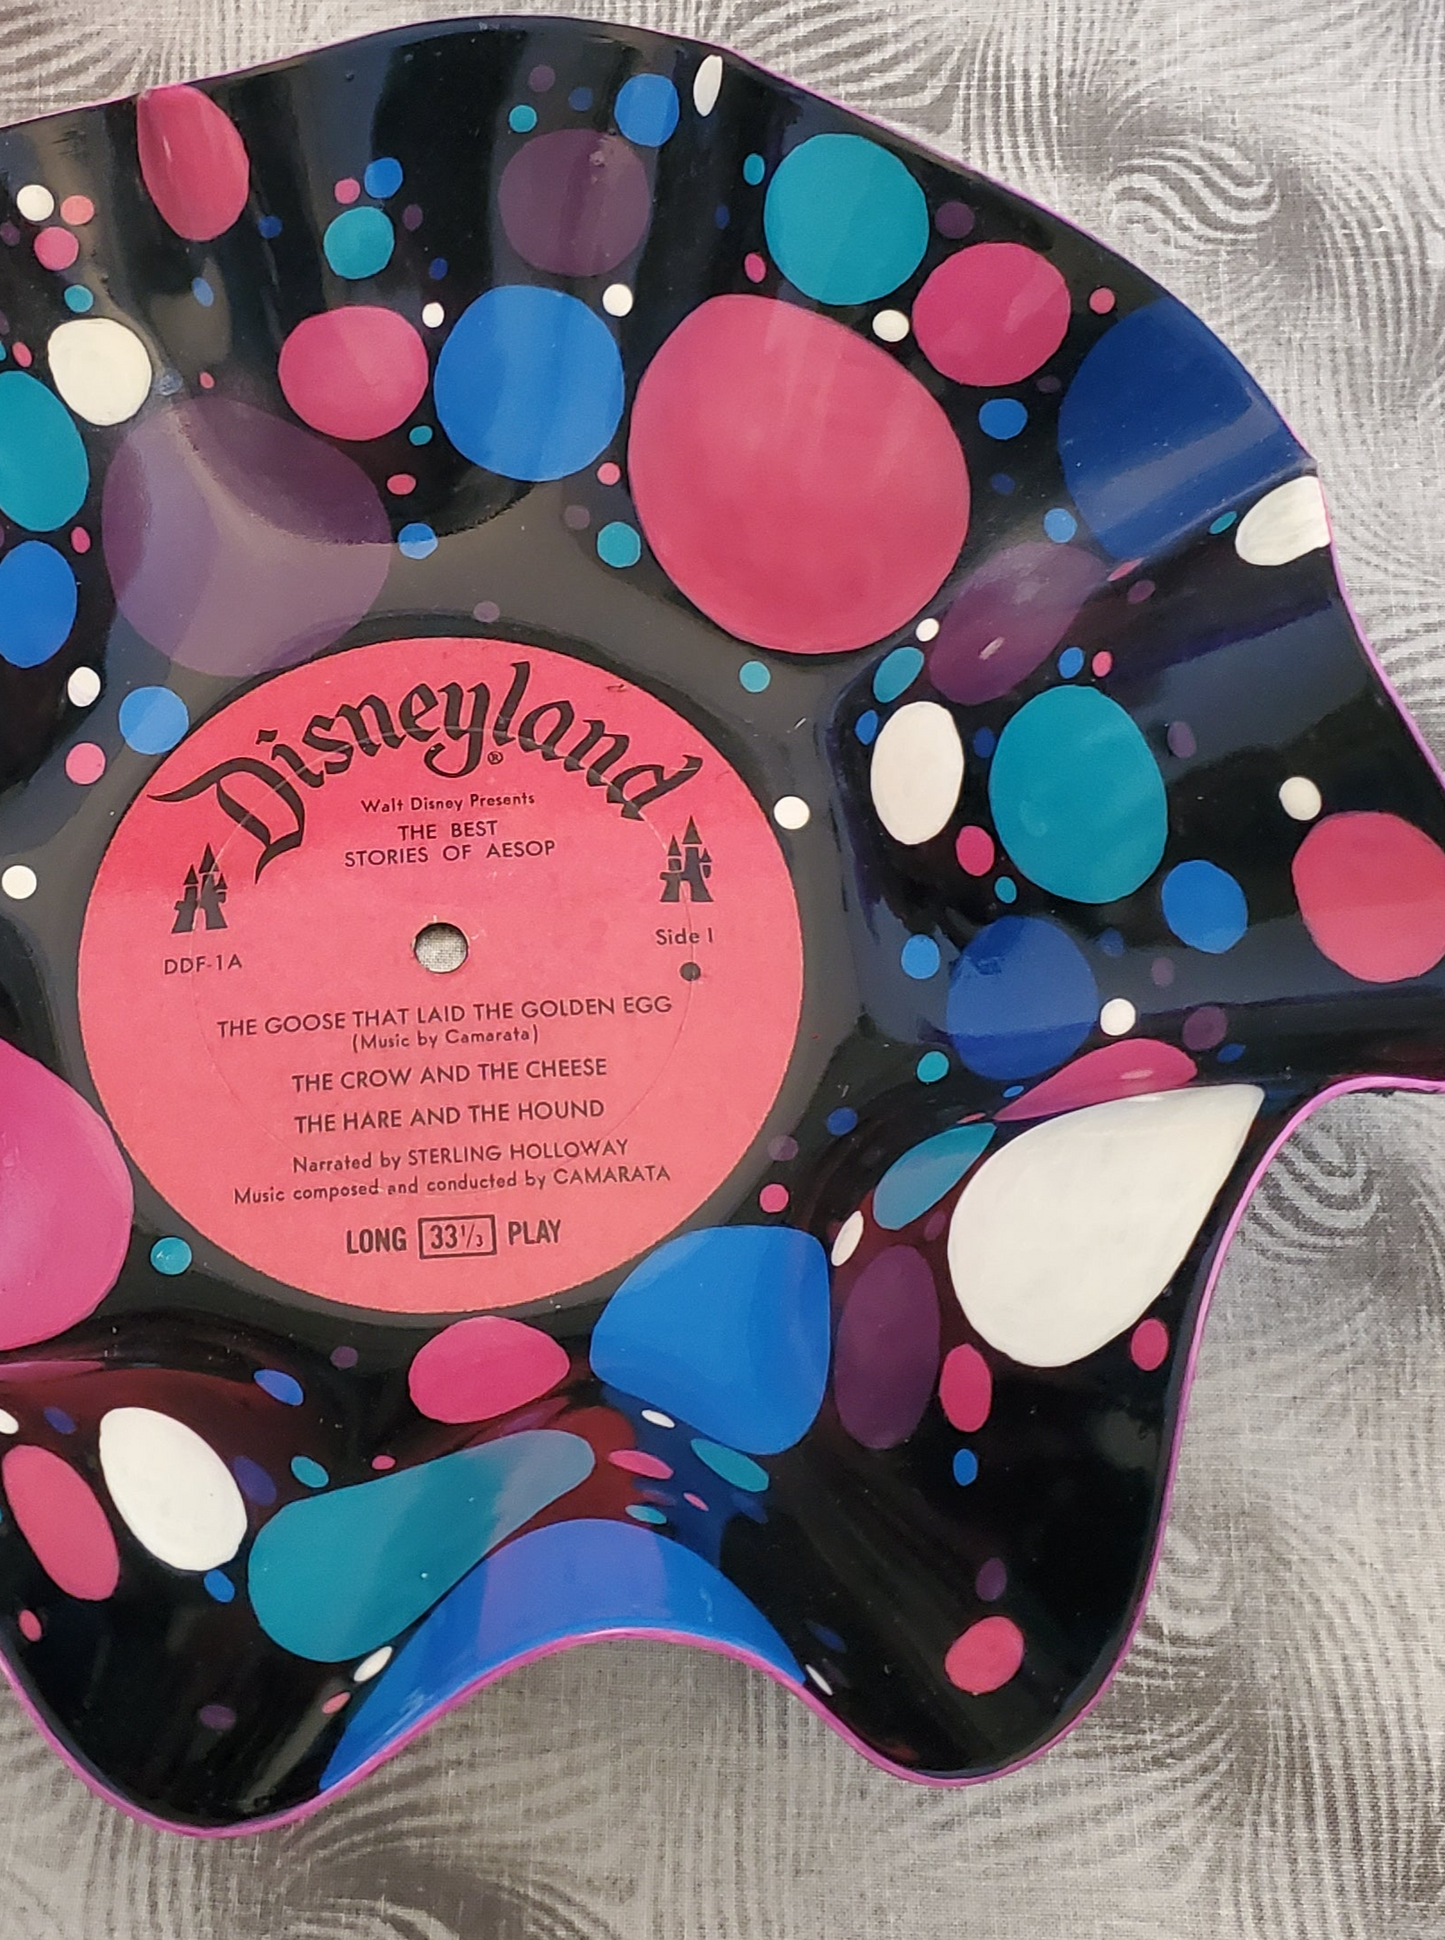 Hand-Painted Disney Record Bowl